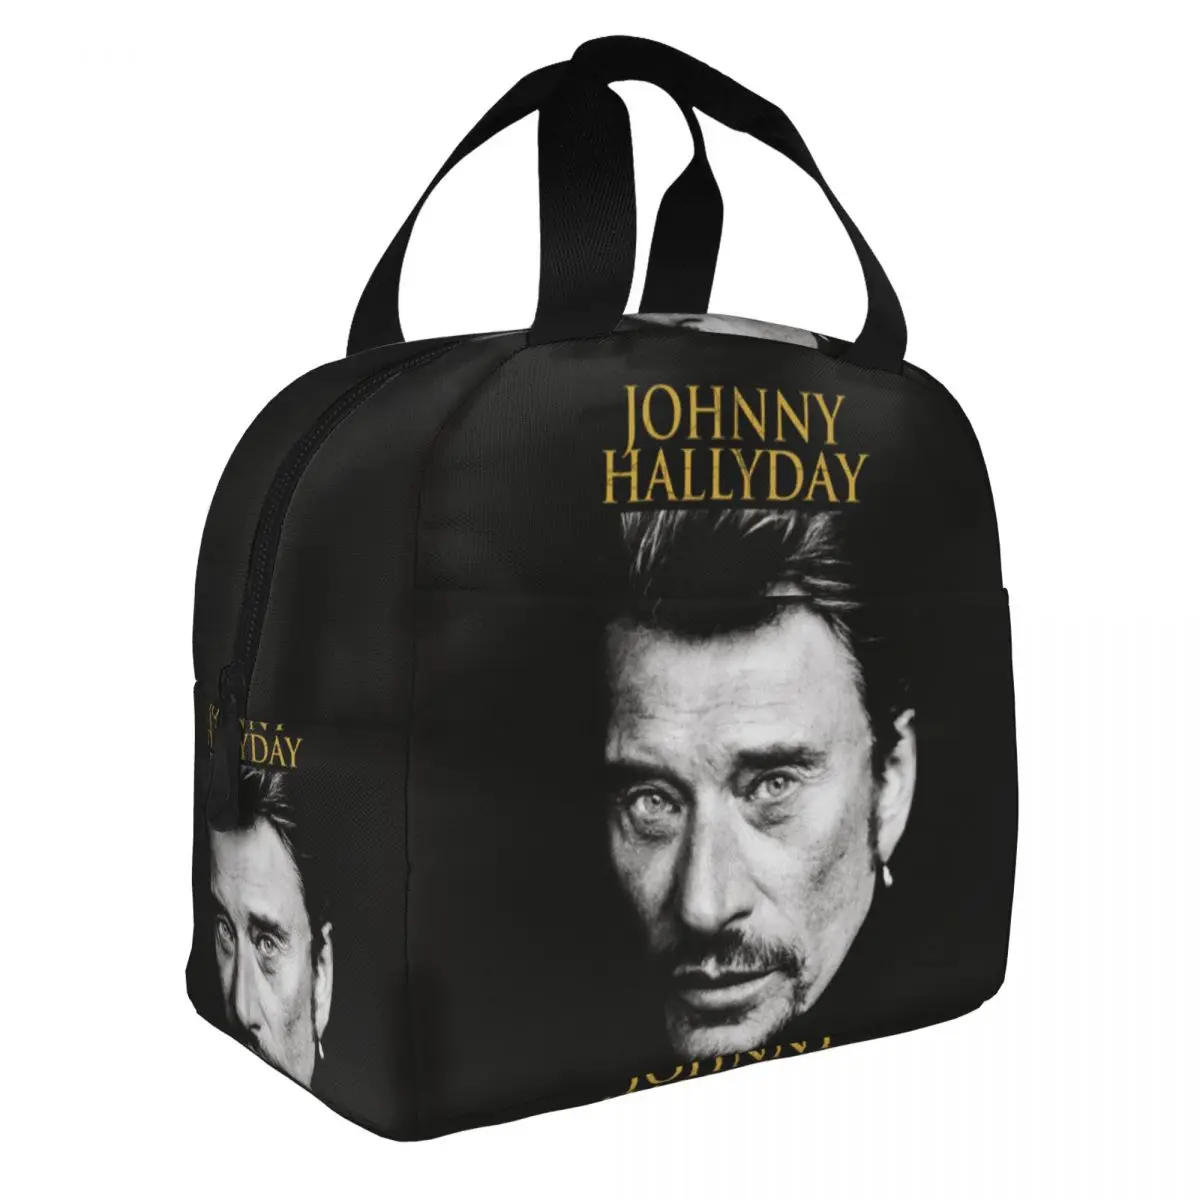 Johnny Hallyday Lunch Bento Bags Portable Aluminum Foil thickened Thermal Cloth Lunch Bag for Women Men Boy